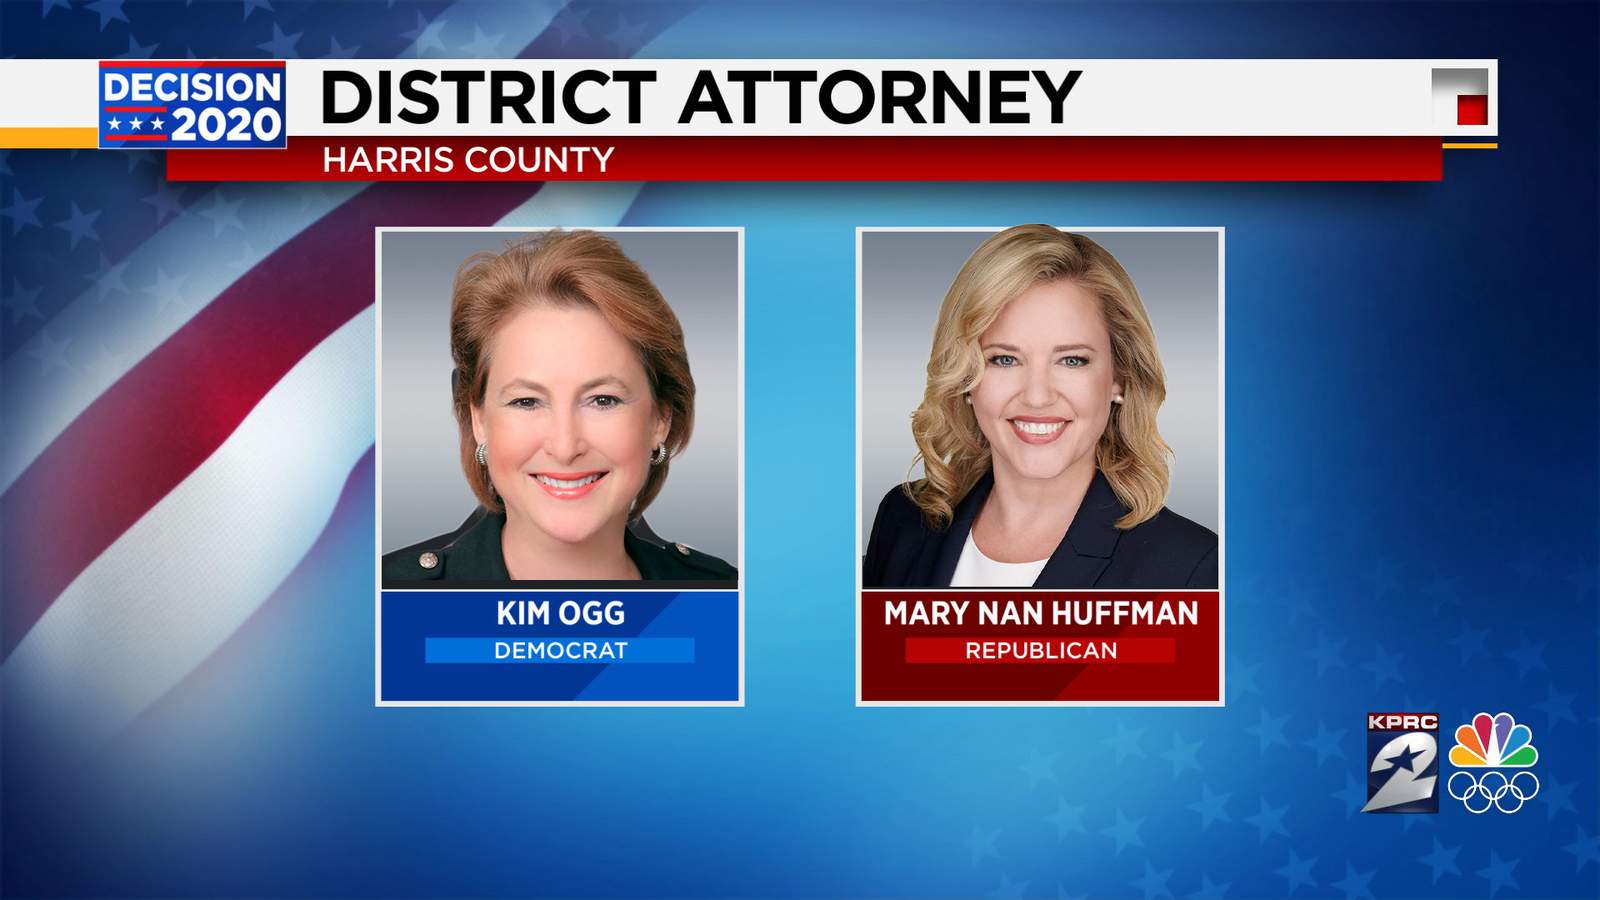 Kim Ogg claims victory with results showing reelection in Harris County District Attorney race